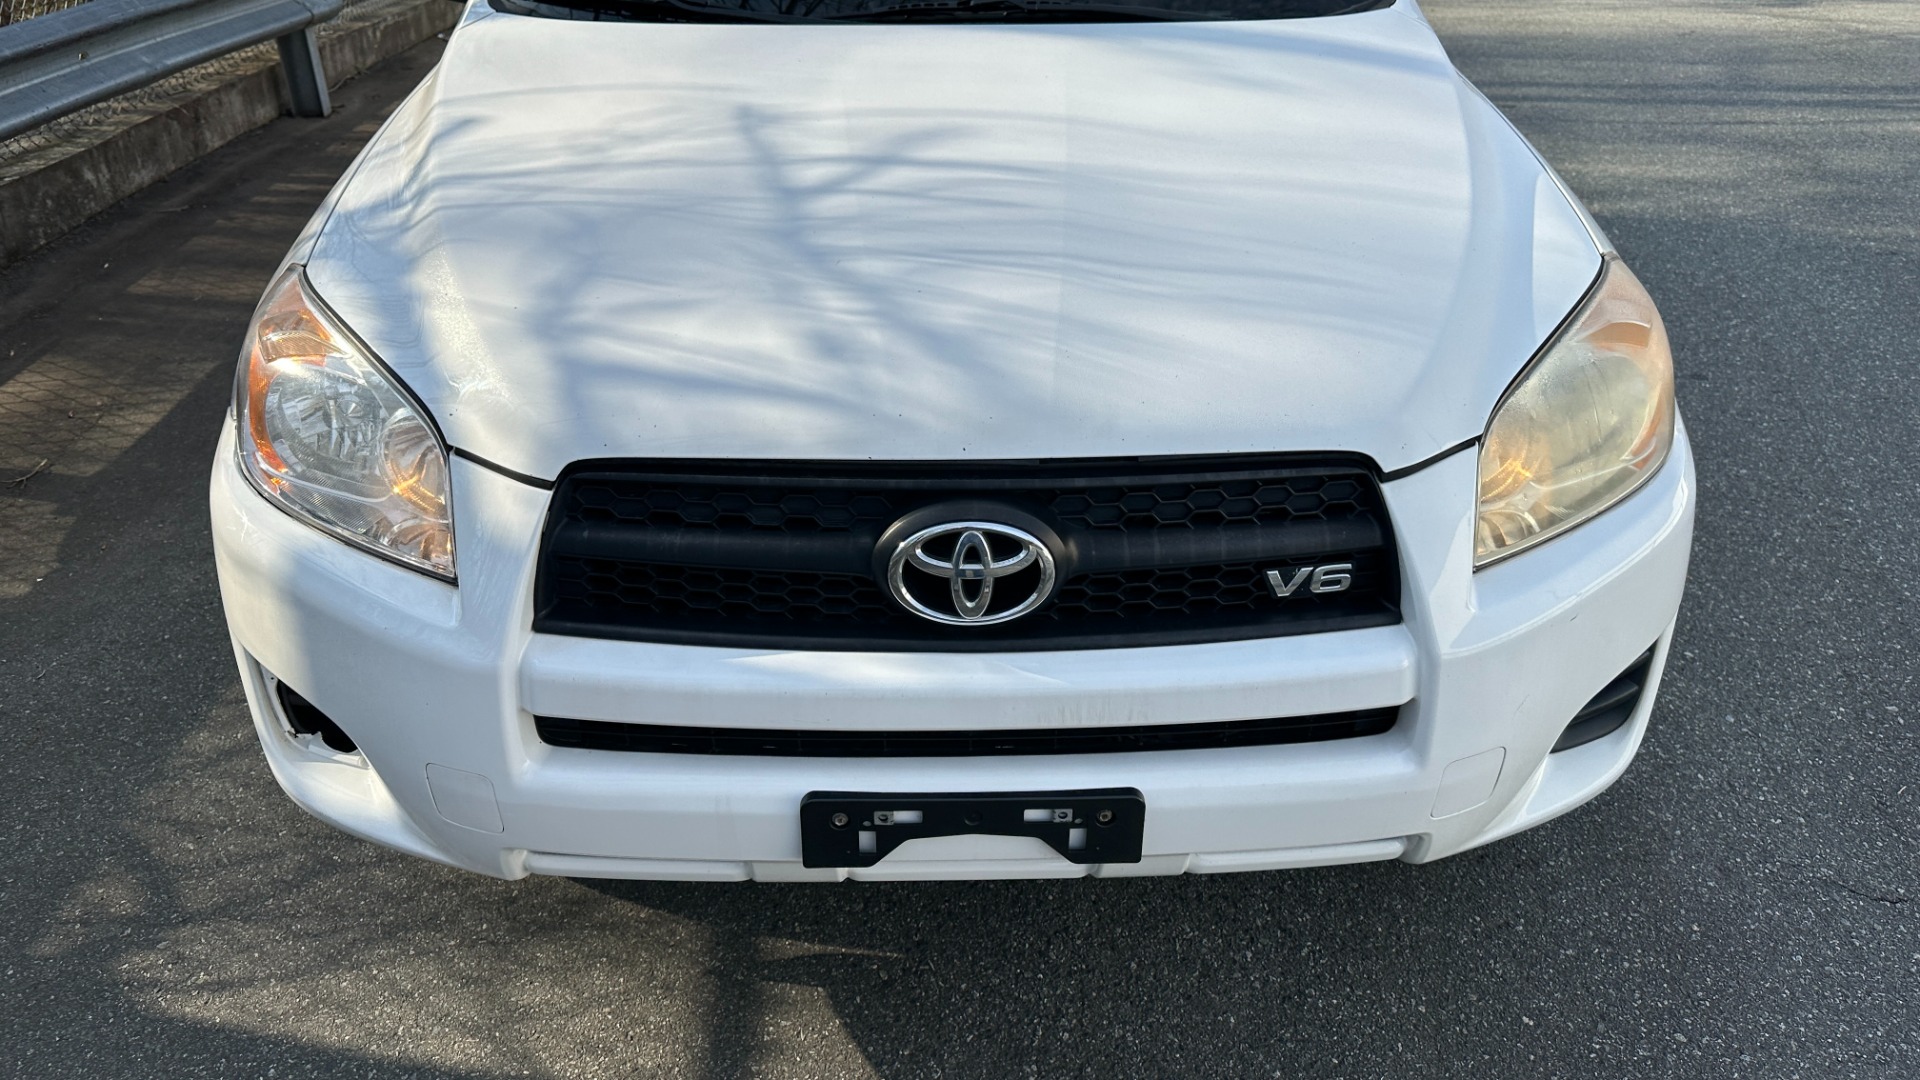 Used 2012 Toyota RAV4 4X4 / VALUE PACKAGE / ROOF RACK / TOW PACKAGE / DAYTIME RUNNING LIGHTS for sale Sold at Formula Imports in Charlotte NC 28227 32